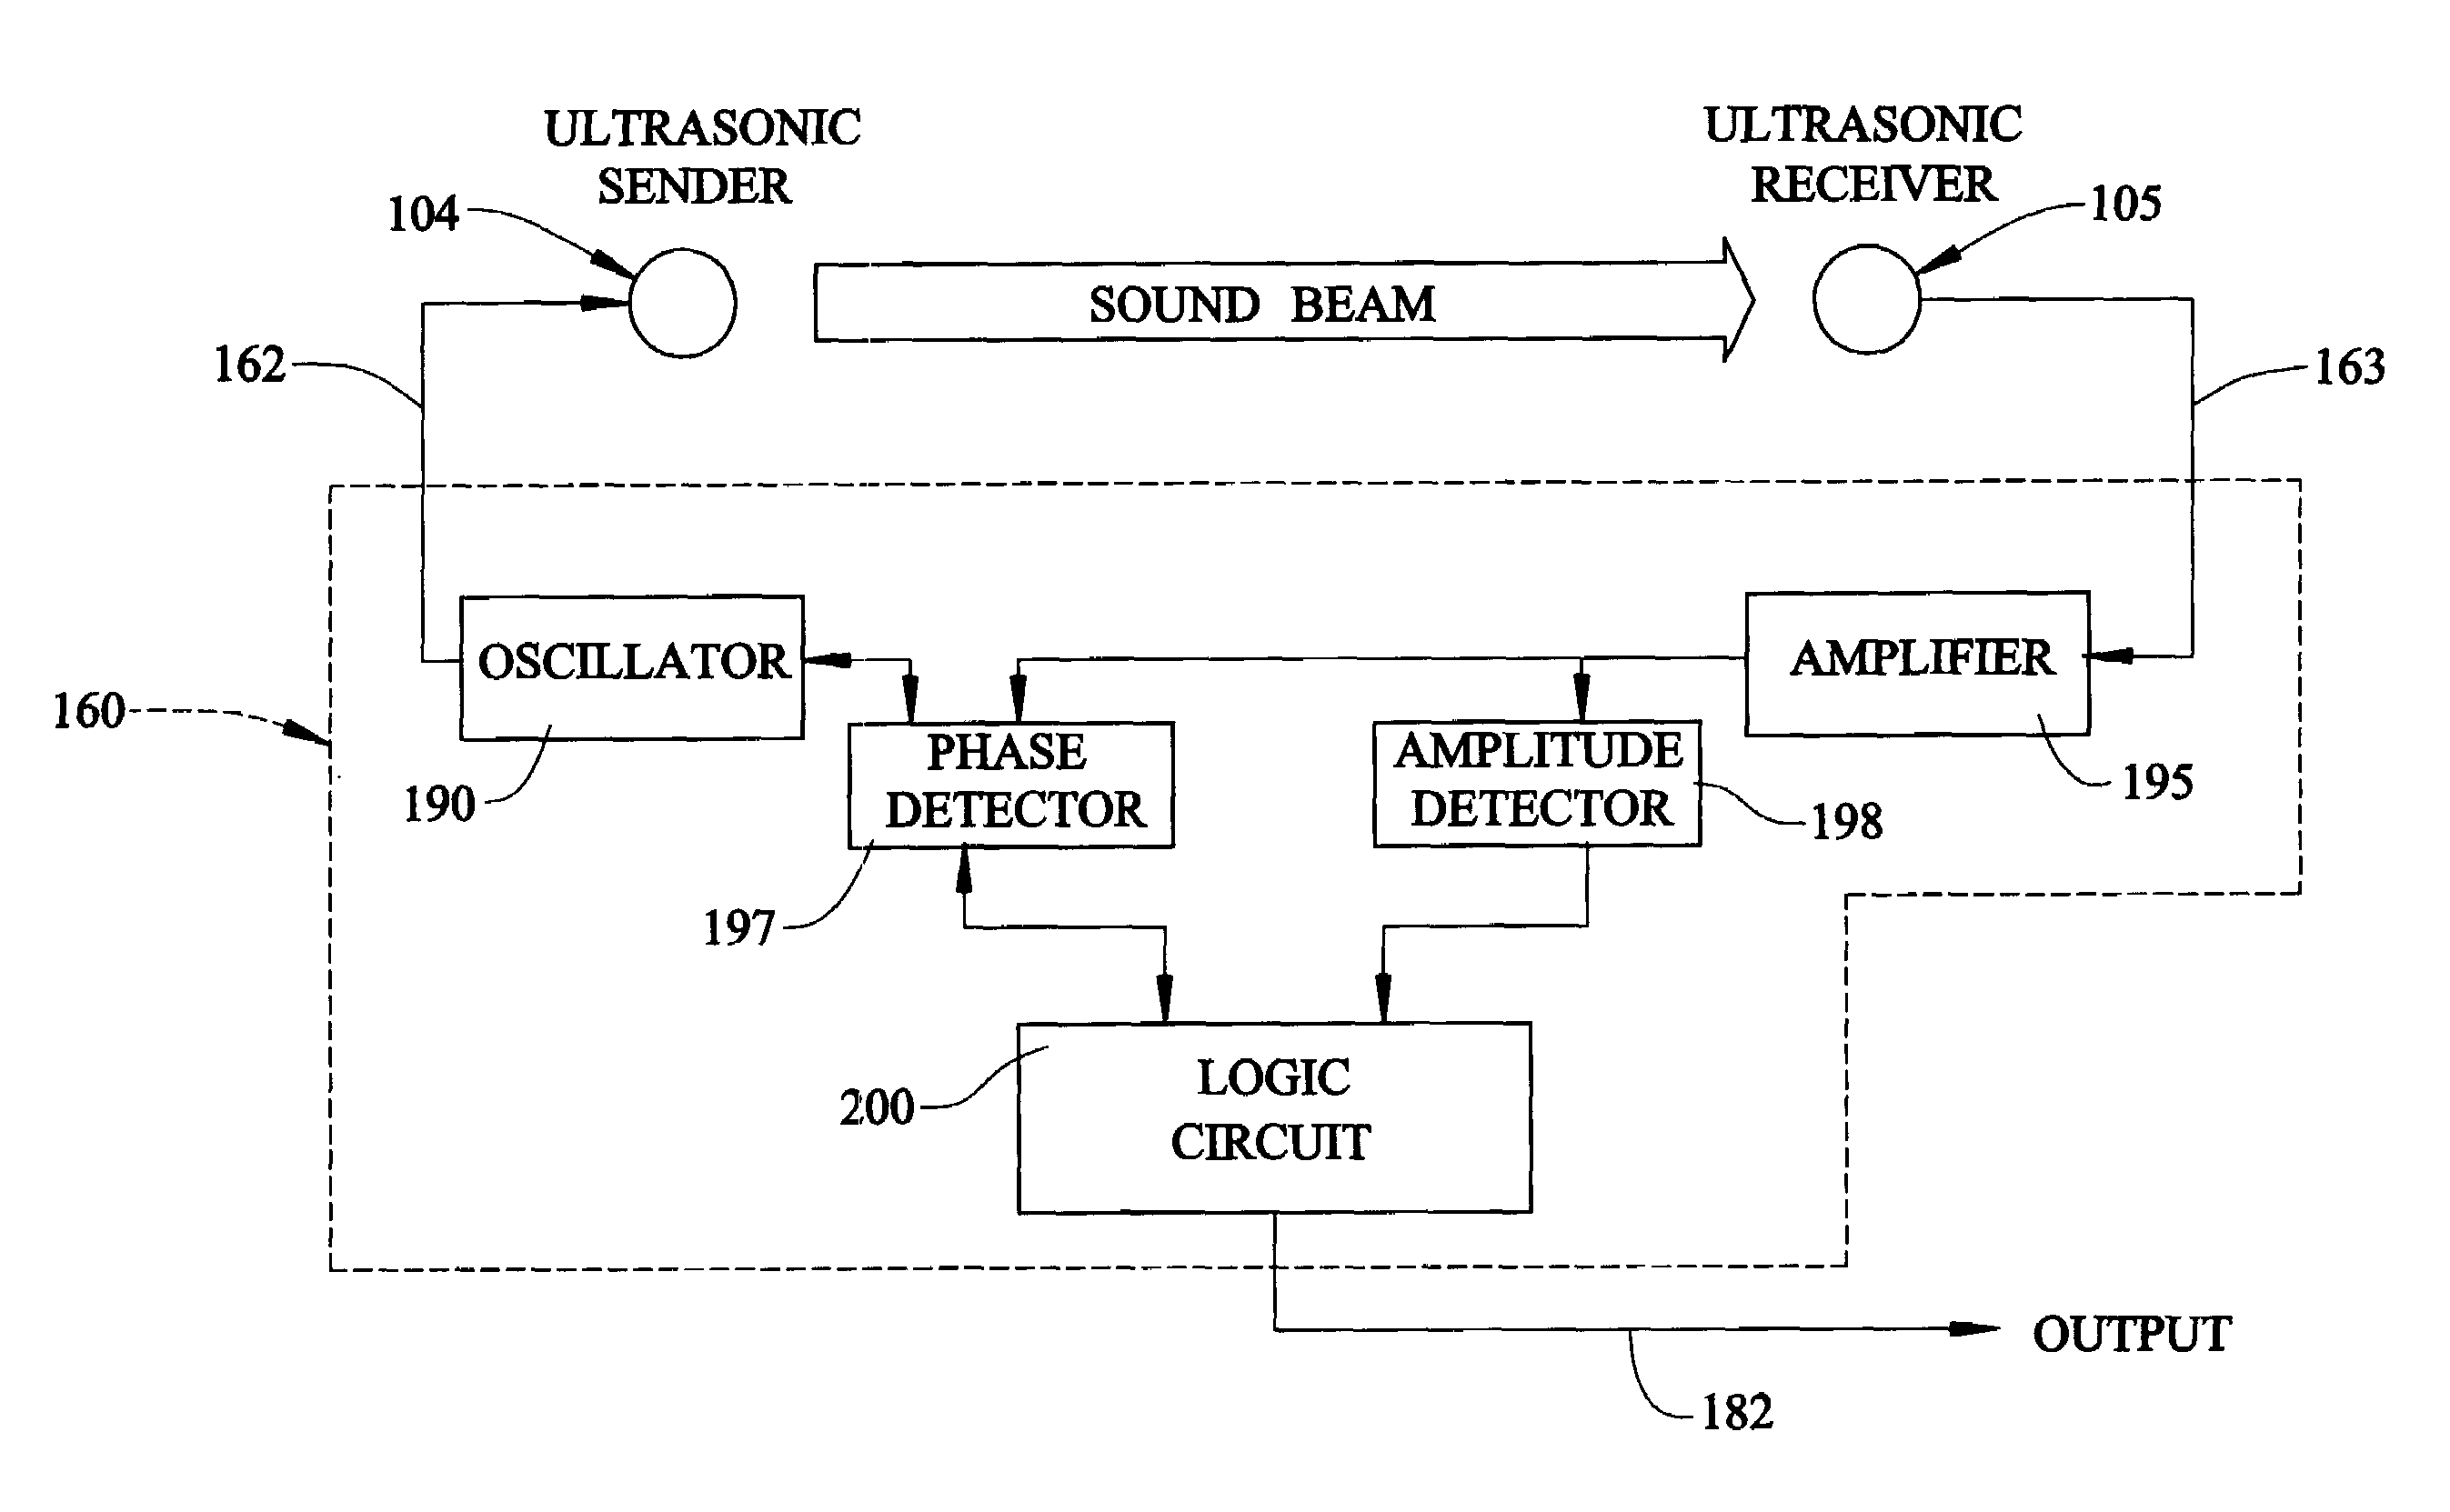 Ultrasonic sensor for detecting the dispensing of a product